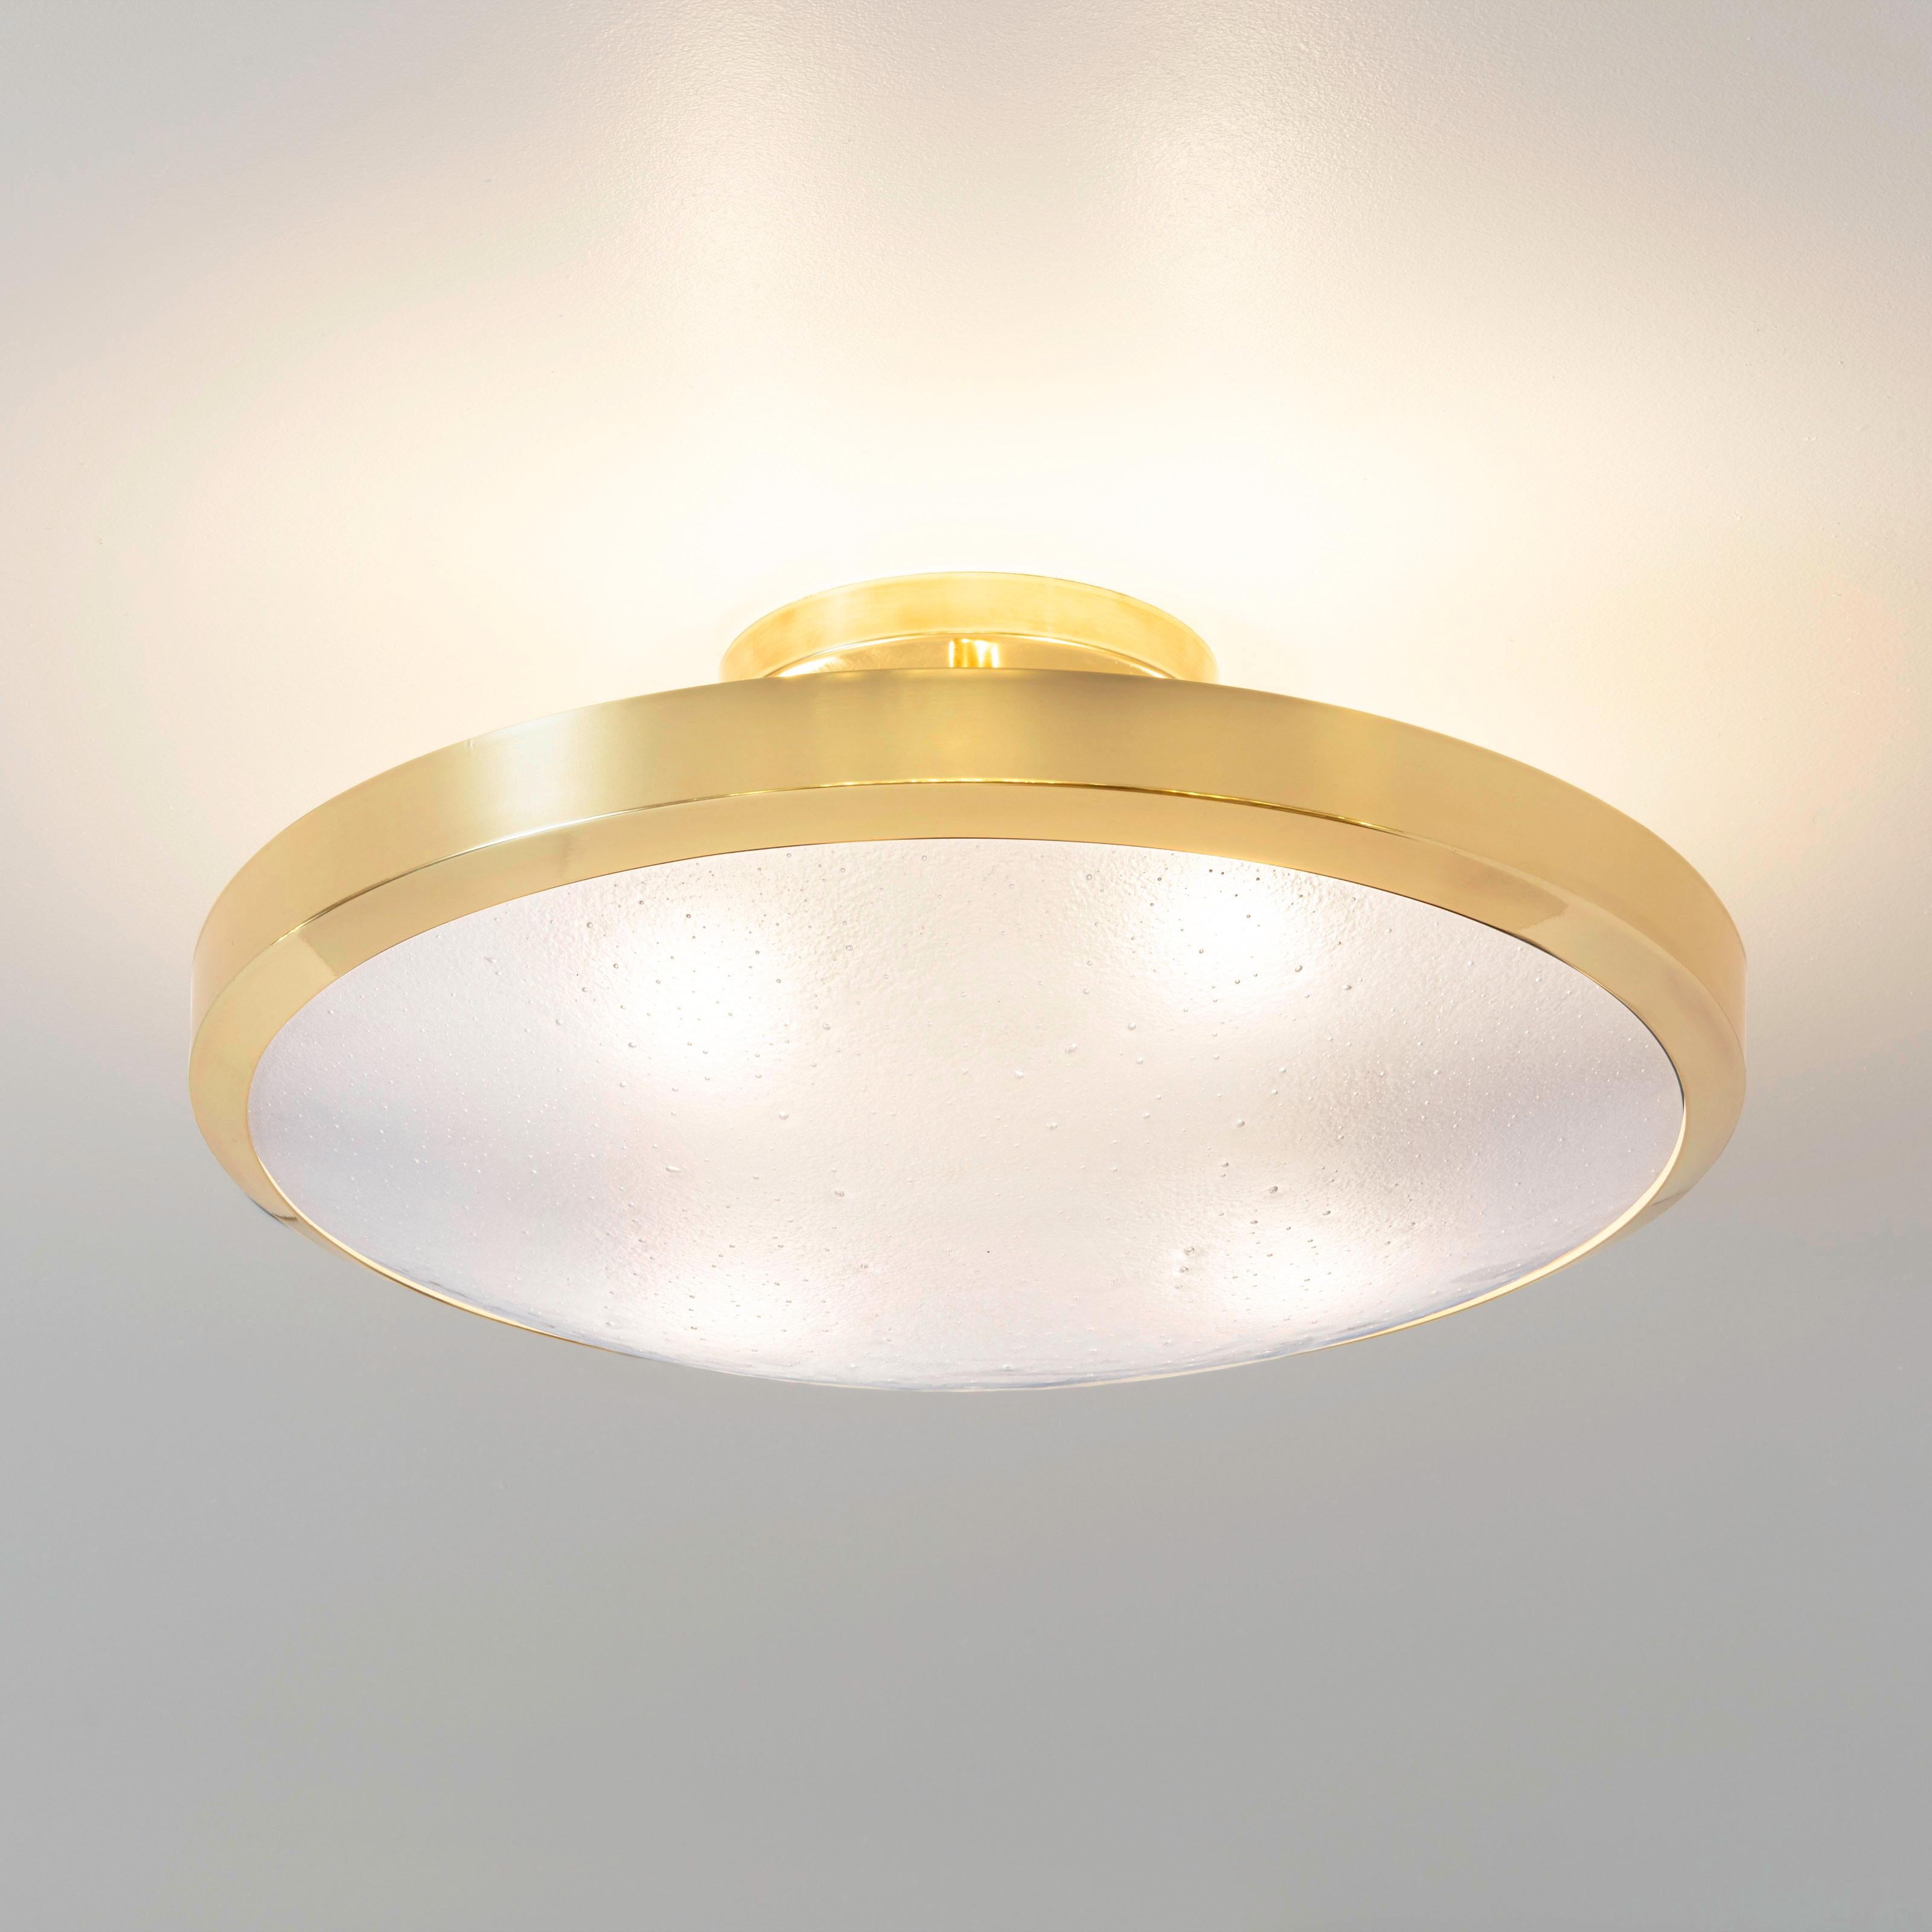 The Uno ceiling light exemplifies simple elegance via its clean profile designed around a single Murano glass shade.

Starting pricing by size- a 10% upcharge applies to premium